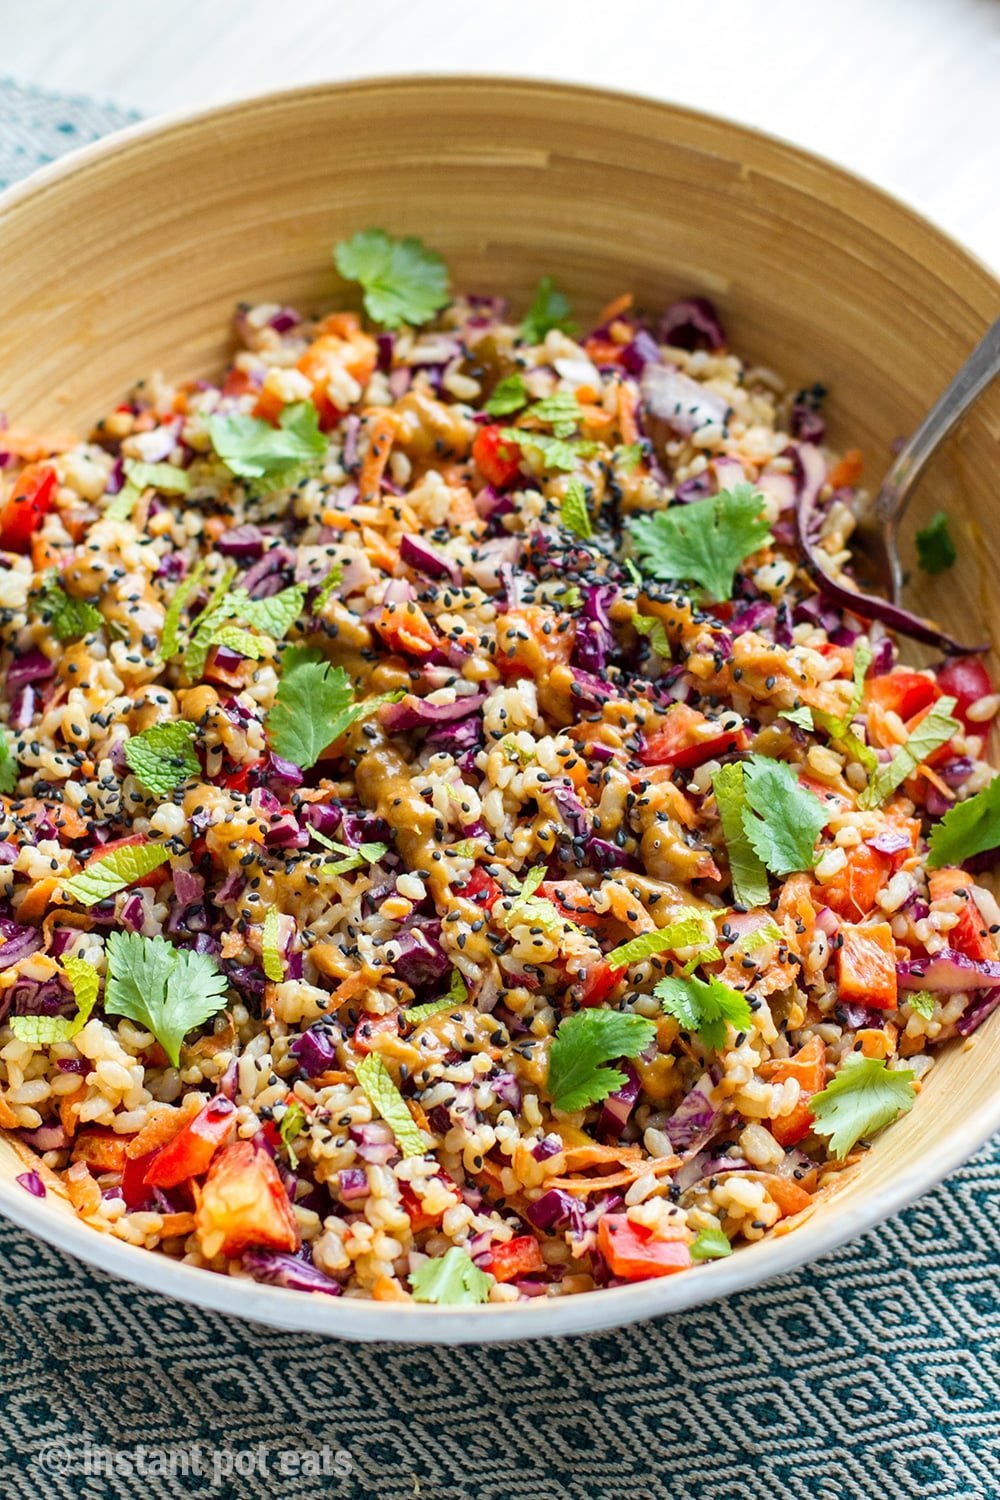 Instant Pot Asian Brown Rice Salad With Peanut Butter Dressing